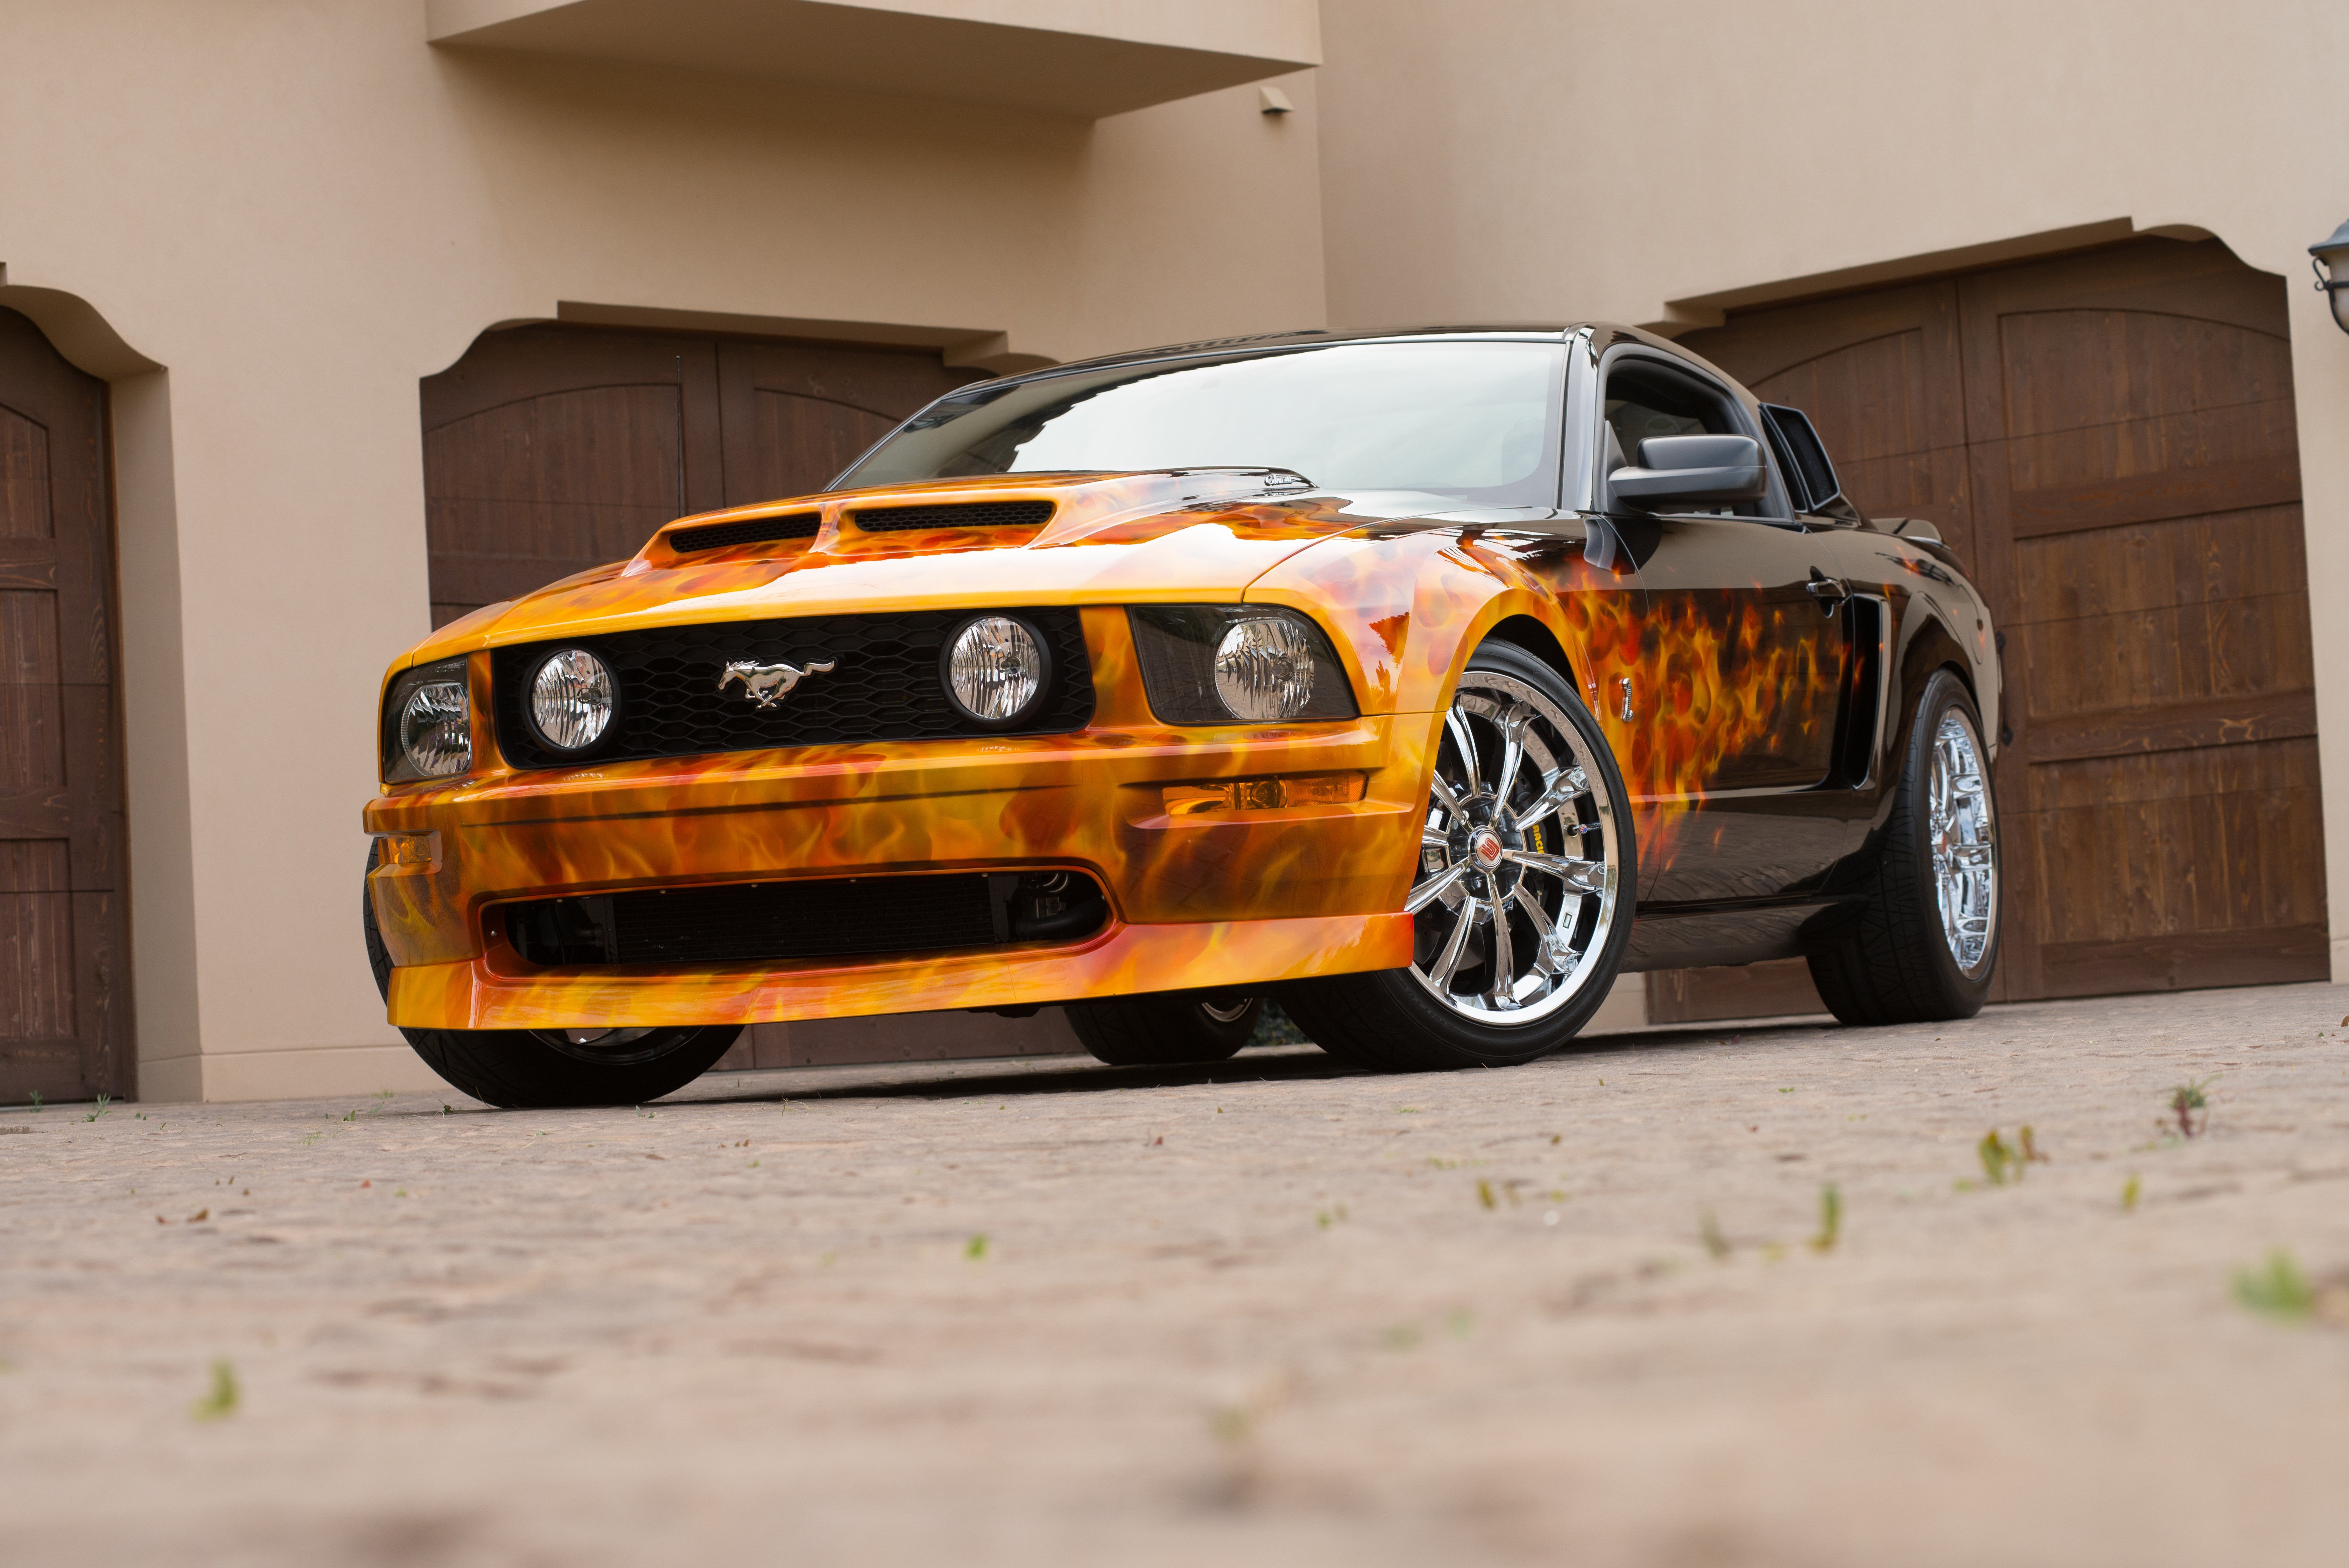 2007, Ford, Mustang, Gt, Pro, Touring, Super, Street, Rodder, Rod, Muscle, Usa, 6016x4016 01 01 Wallpaper